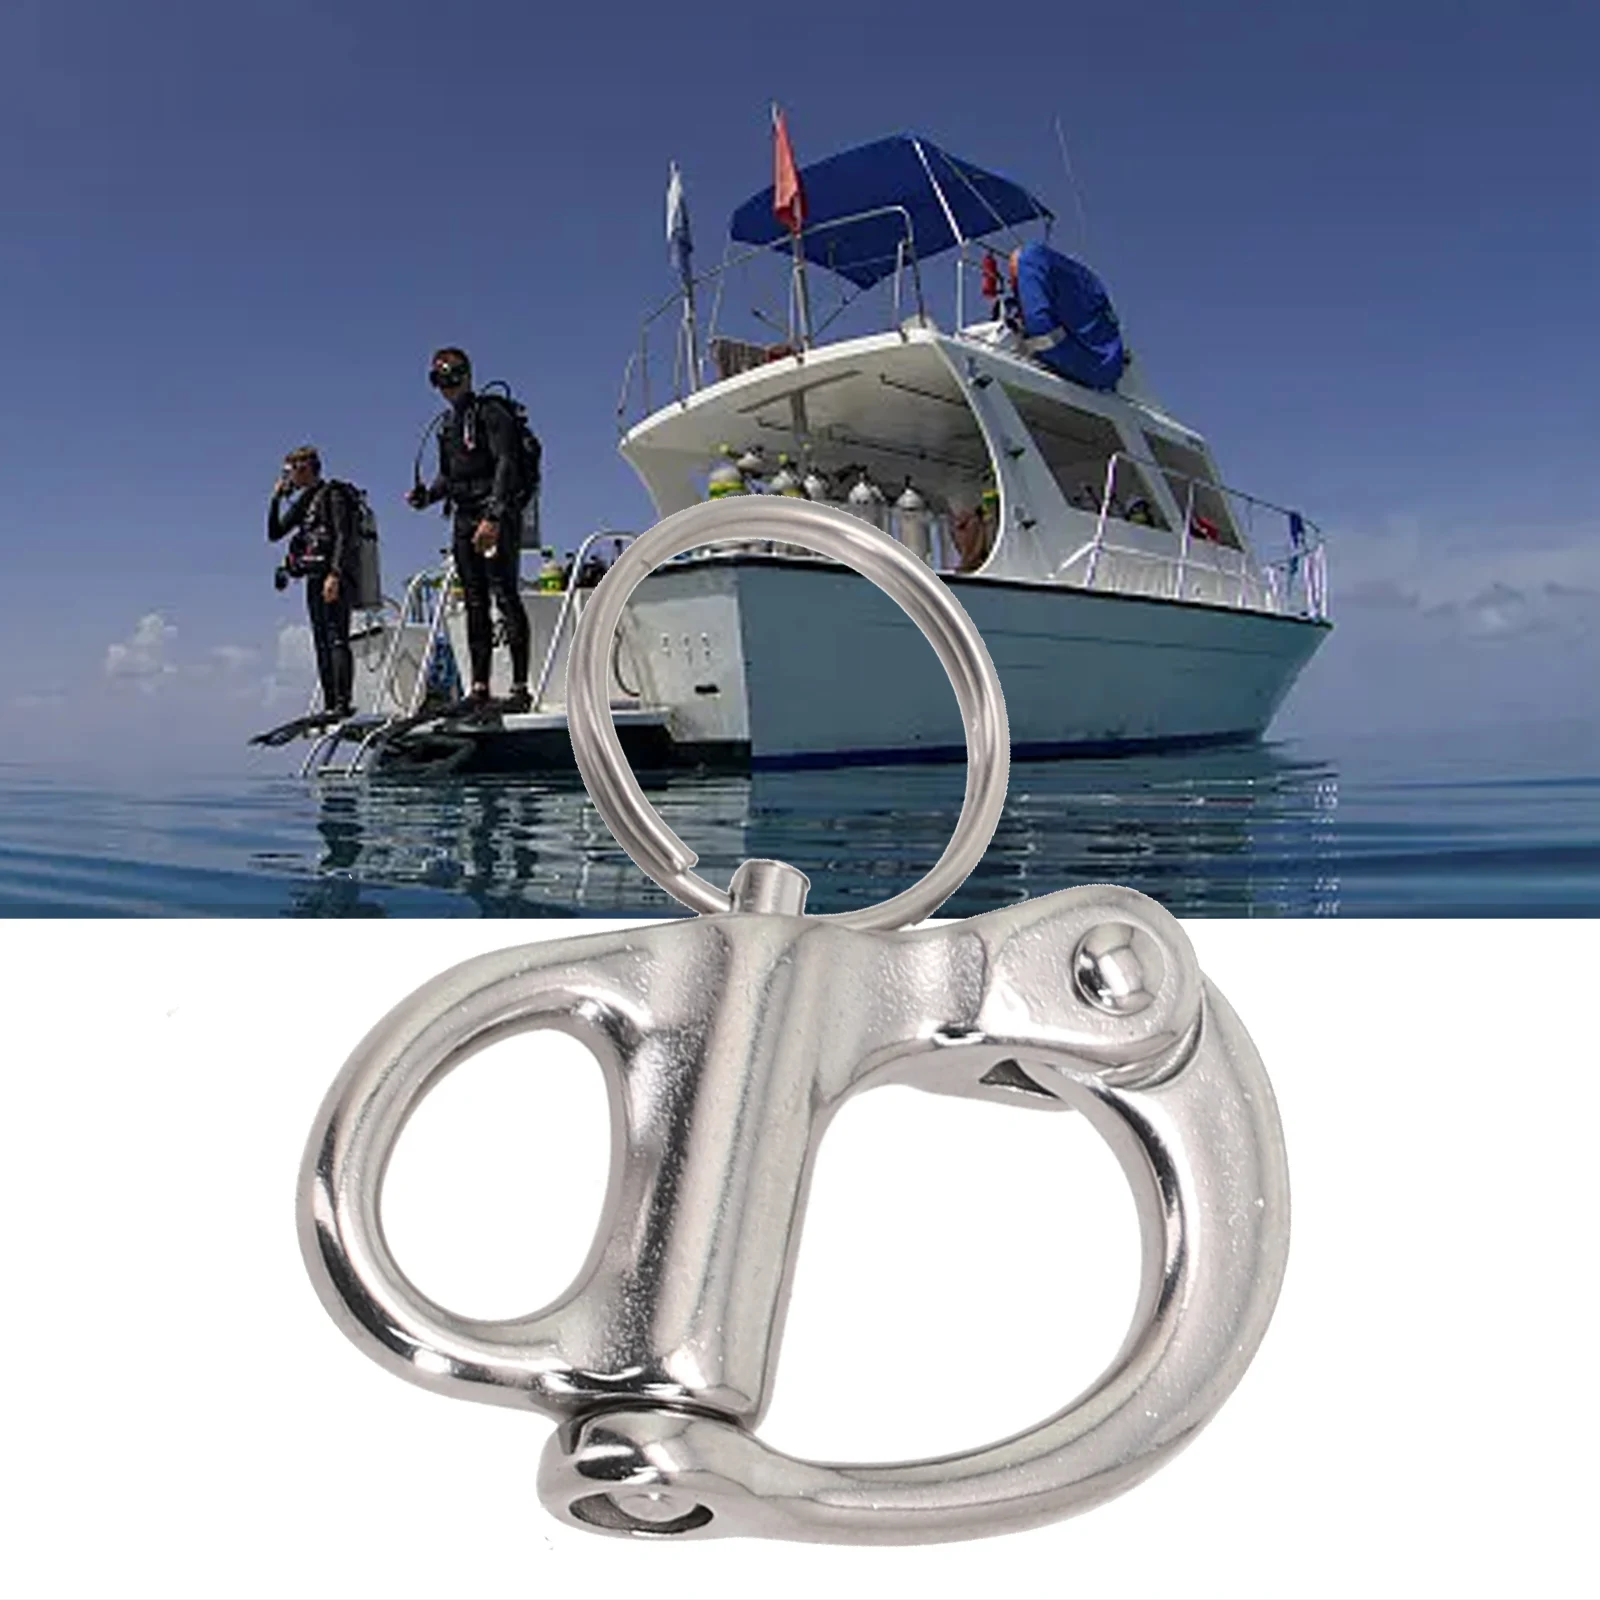 1PCS 35/52/69/96MM Quick Release Boat Anchor Chain Eye Shackle Swivel Hook Snap Marine Tools 316/304 Stainless Steel Accessory